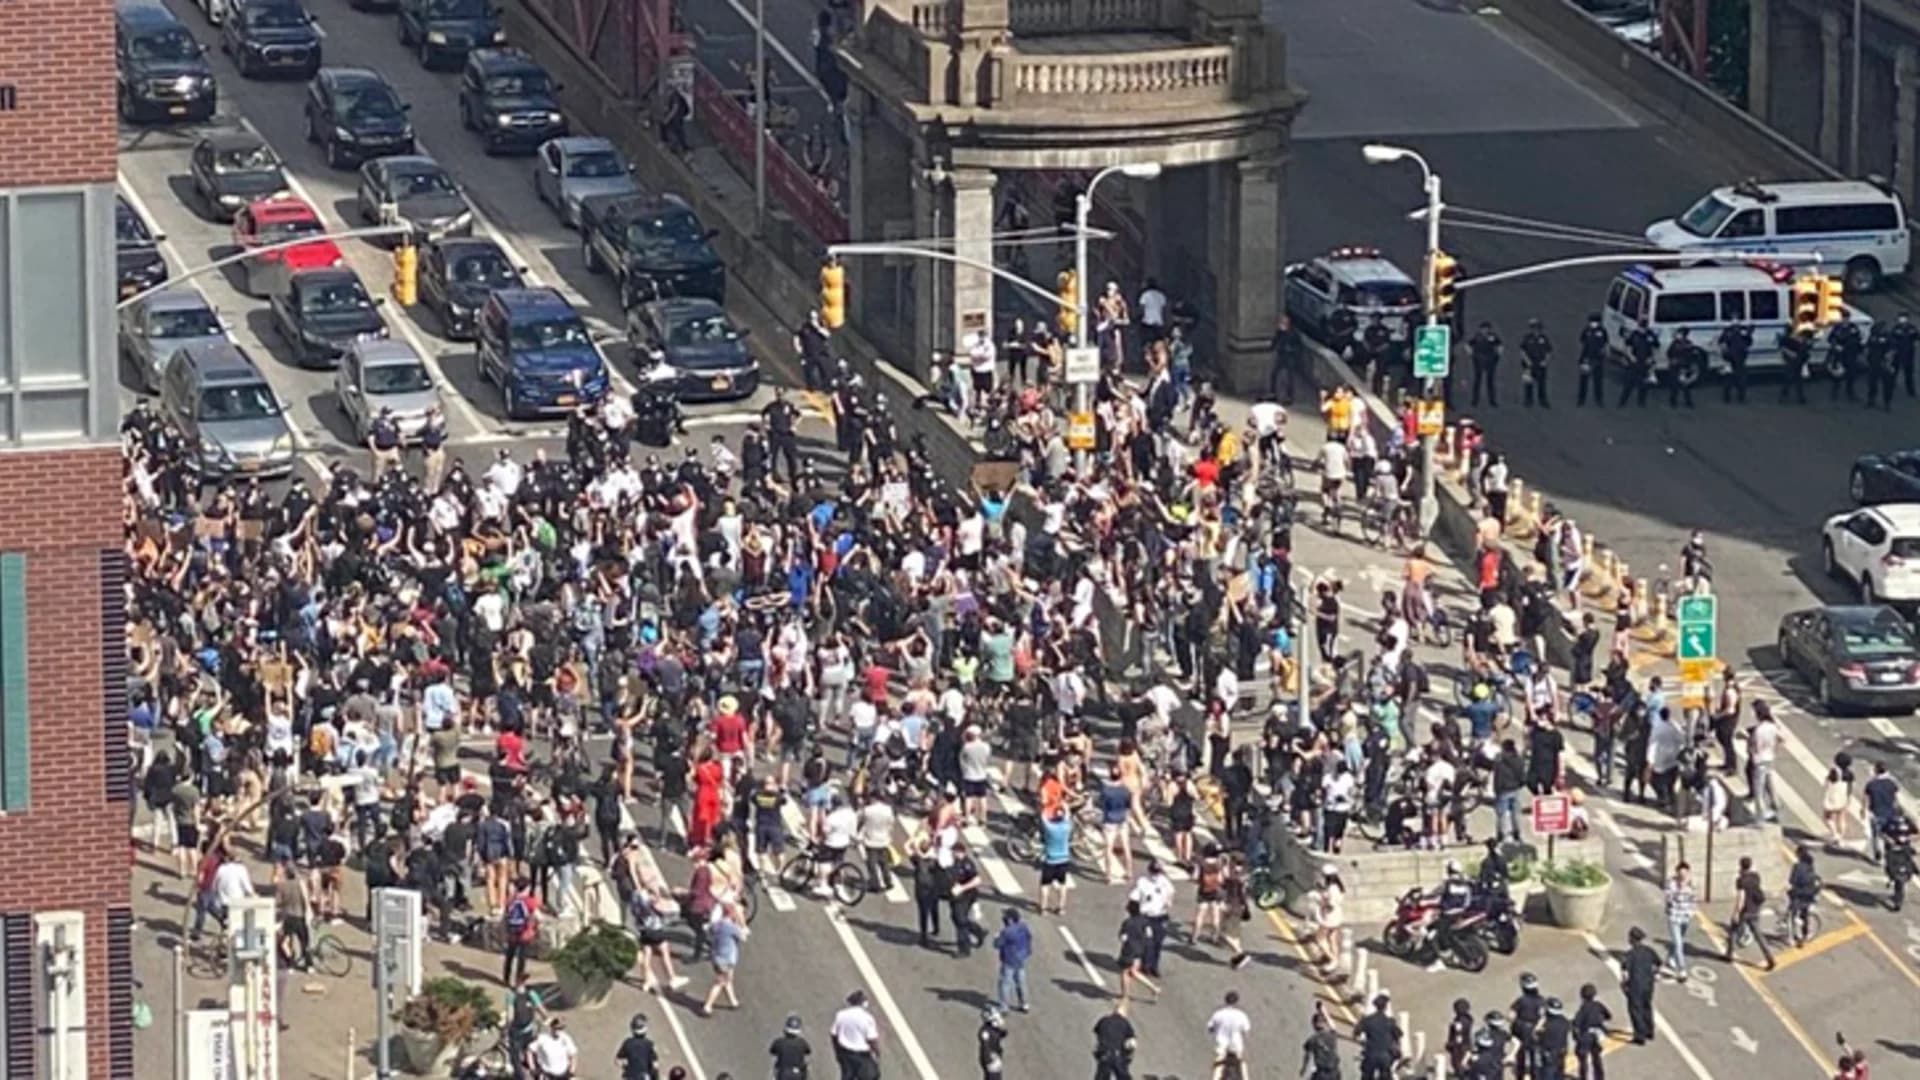 Officials warn of delays near Williamsburg Bridge as protesters gather